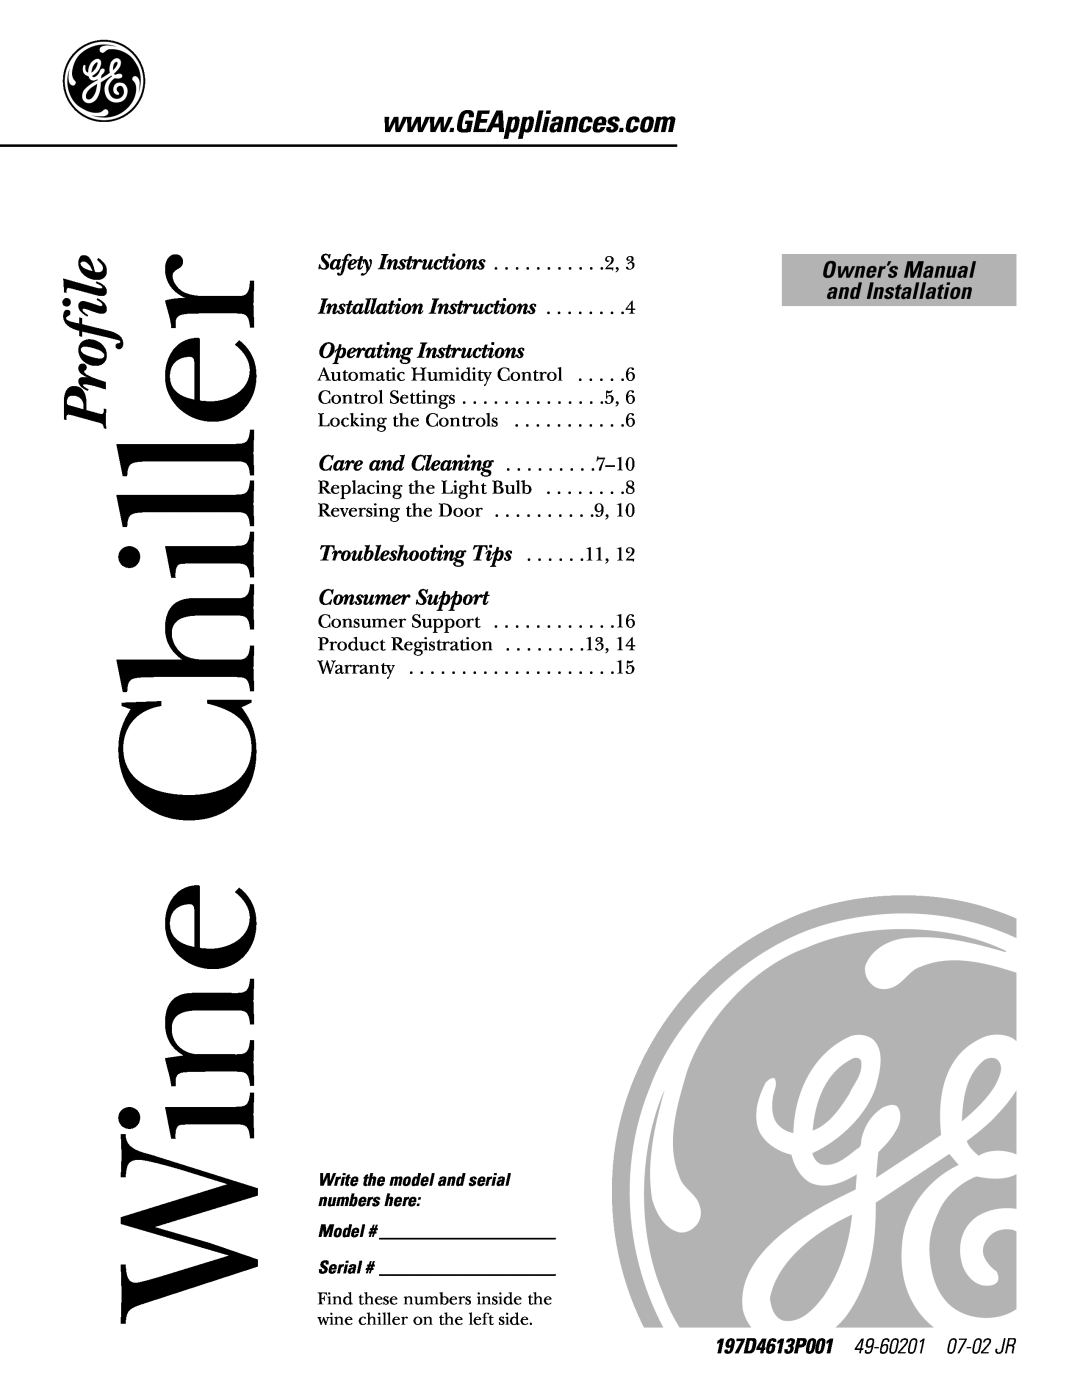 GE Wine Chiller installation instructions Installation Instructions, Operating Instructions, Troubleshooting Tips, Profile 